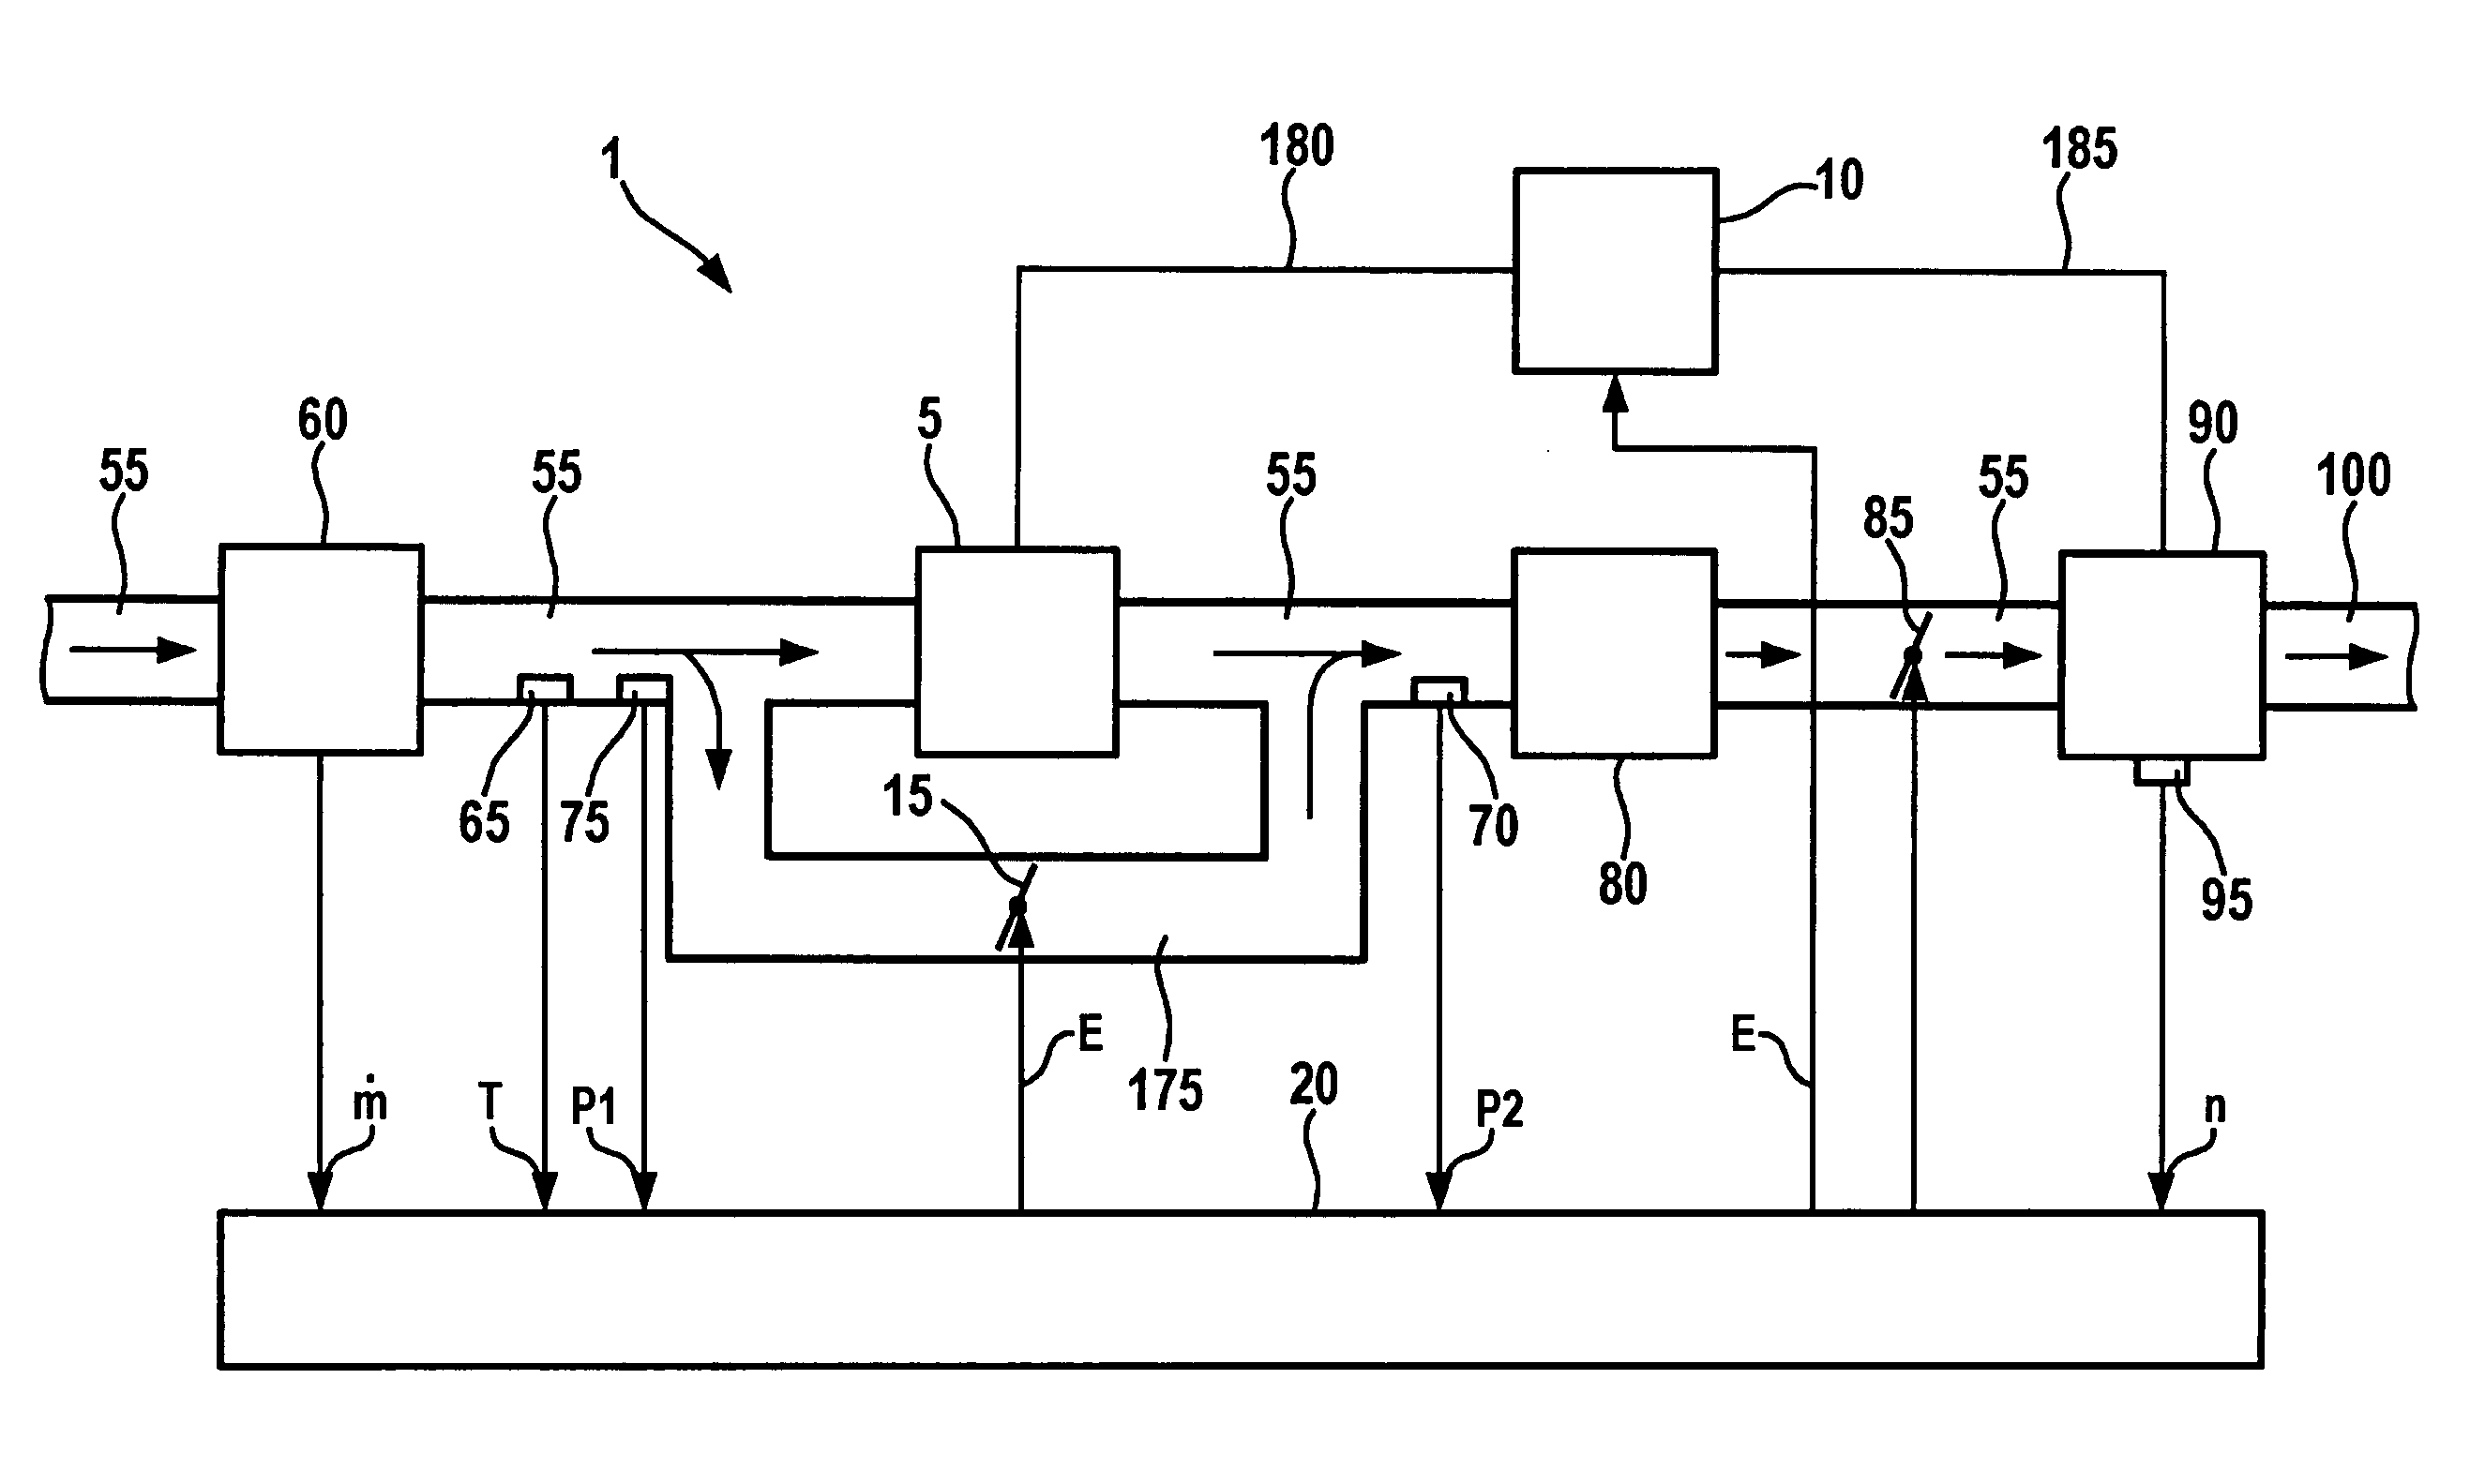 Method and device for operating an internal combustion engine having a compressor for compressing the air supplied to the internal combustion engine